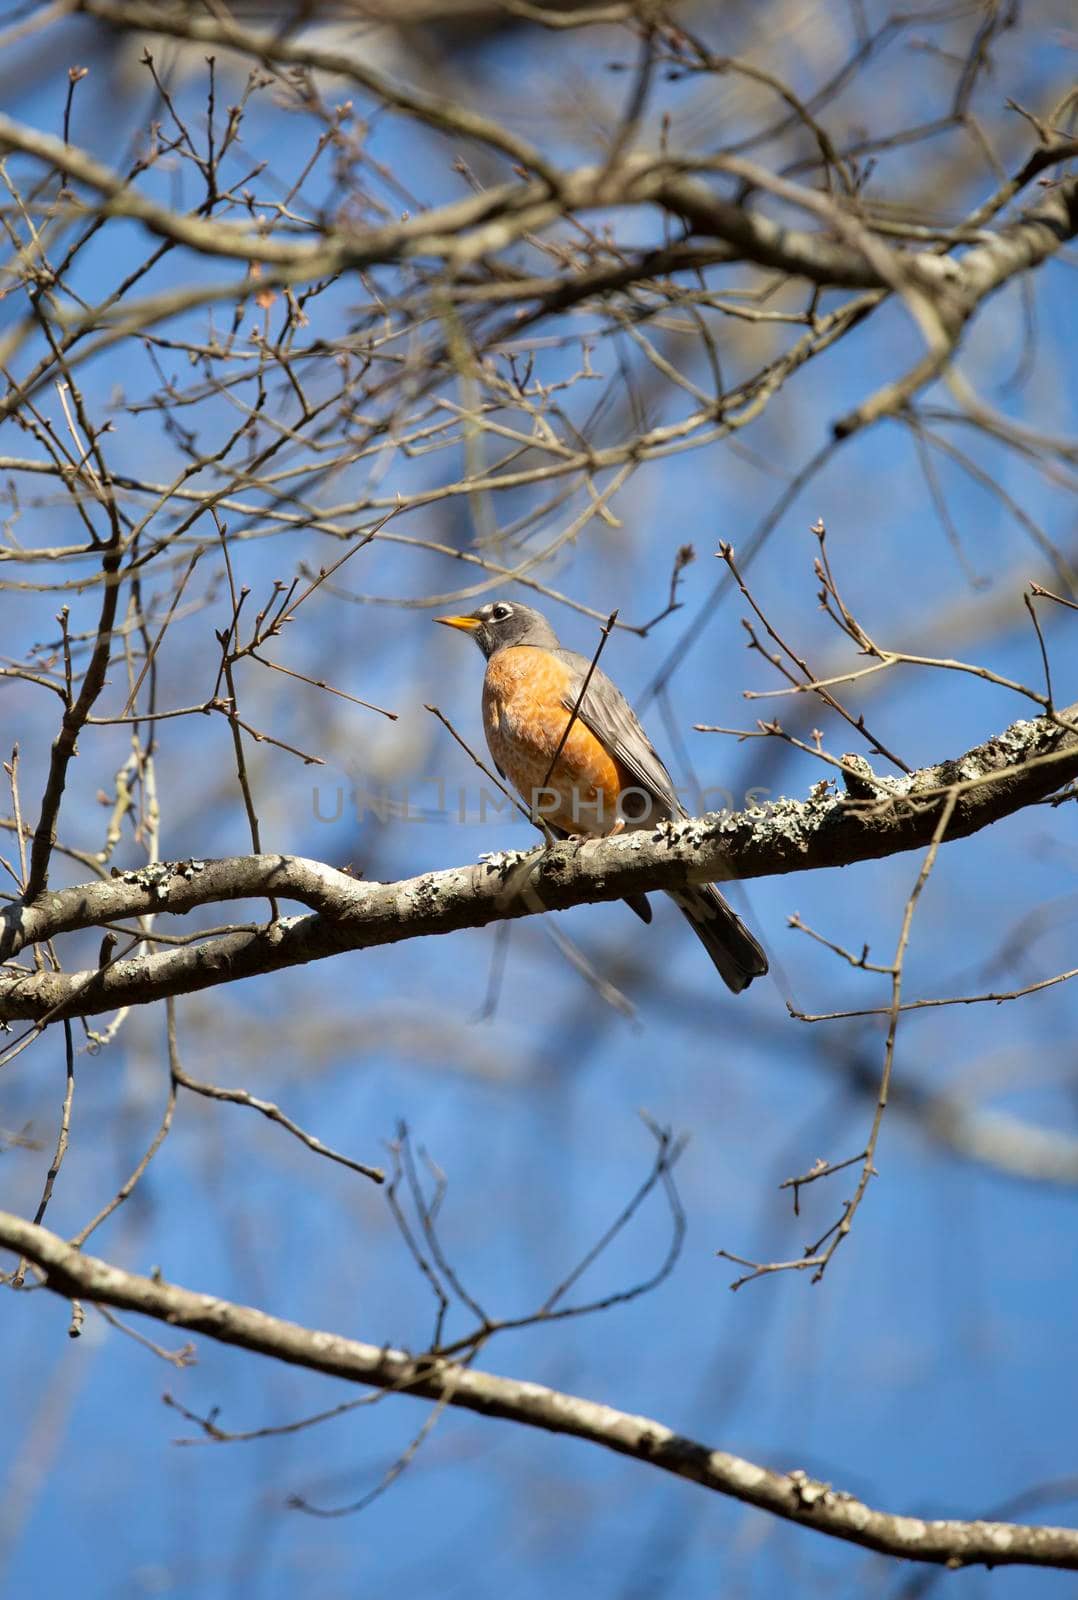 Curious American robin (Turdus migratorius) looking around from its perch on a tree limb on a nice day